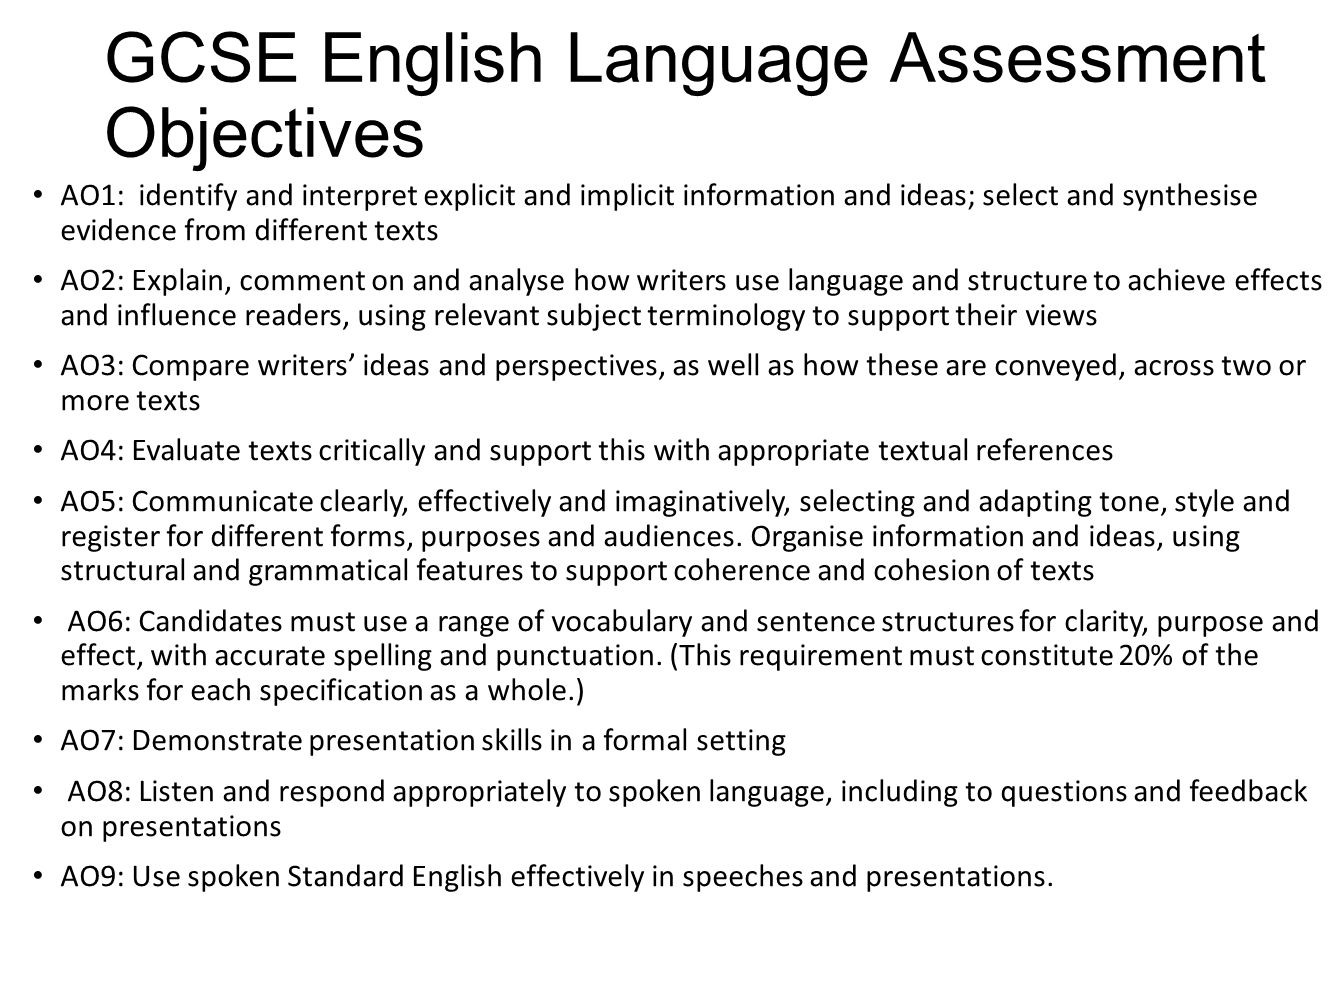 GCSE English Language Assessment Objectives AO1: identify and interpret explicit and implicit information and ideas; select and synthesise evidence from different texts AO2: Explain, comment on and analyse how writers use language and structure to achieve effects and influence readers, using relevant subject terminology to support their views AO3: Compare writers’ ideas and perspectives, as well as how these are conveyed, across two or more texts AO4: Evaluate texts critically and support this with appropriate textual references AO5: Communicate clearly, effectively and imaginatively, selecting and adapting tone, style and register for different forms, purposes and audiences.